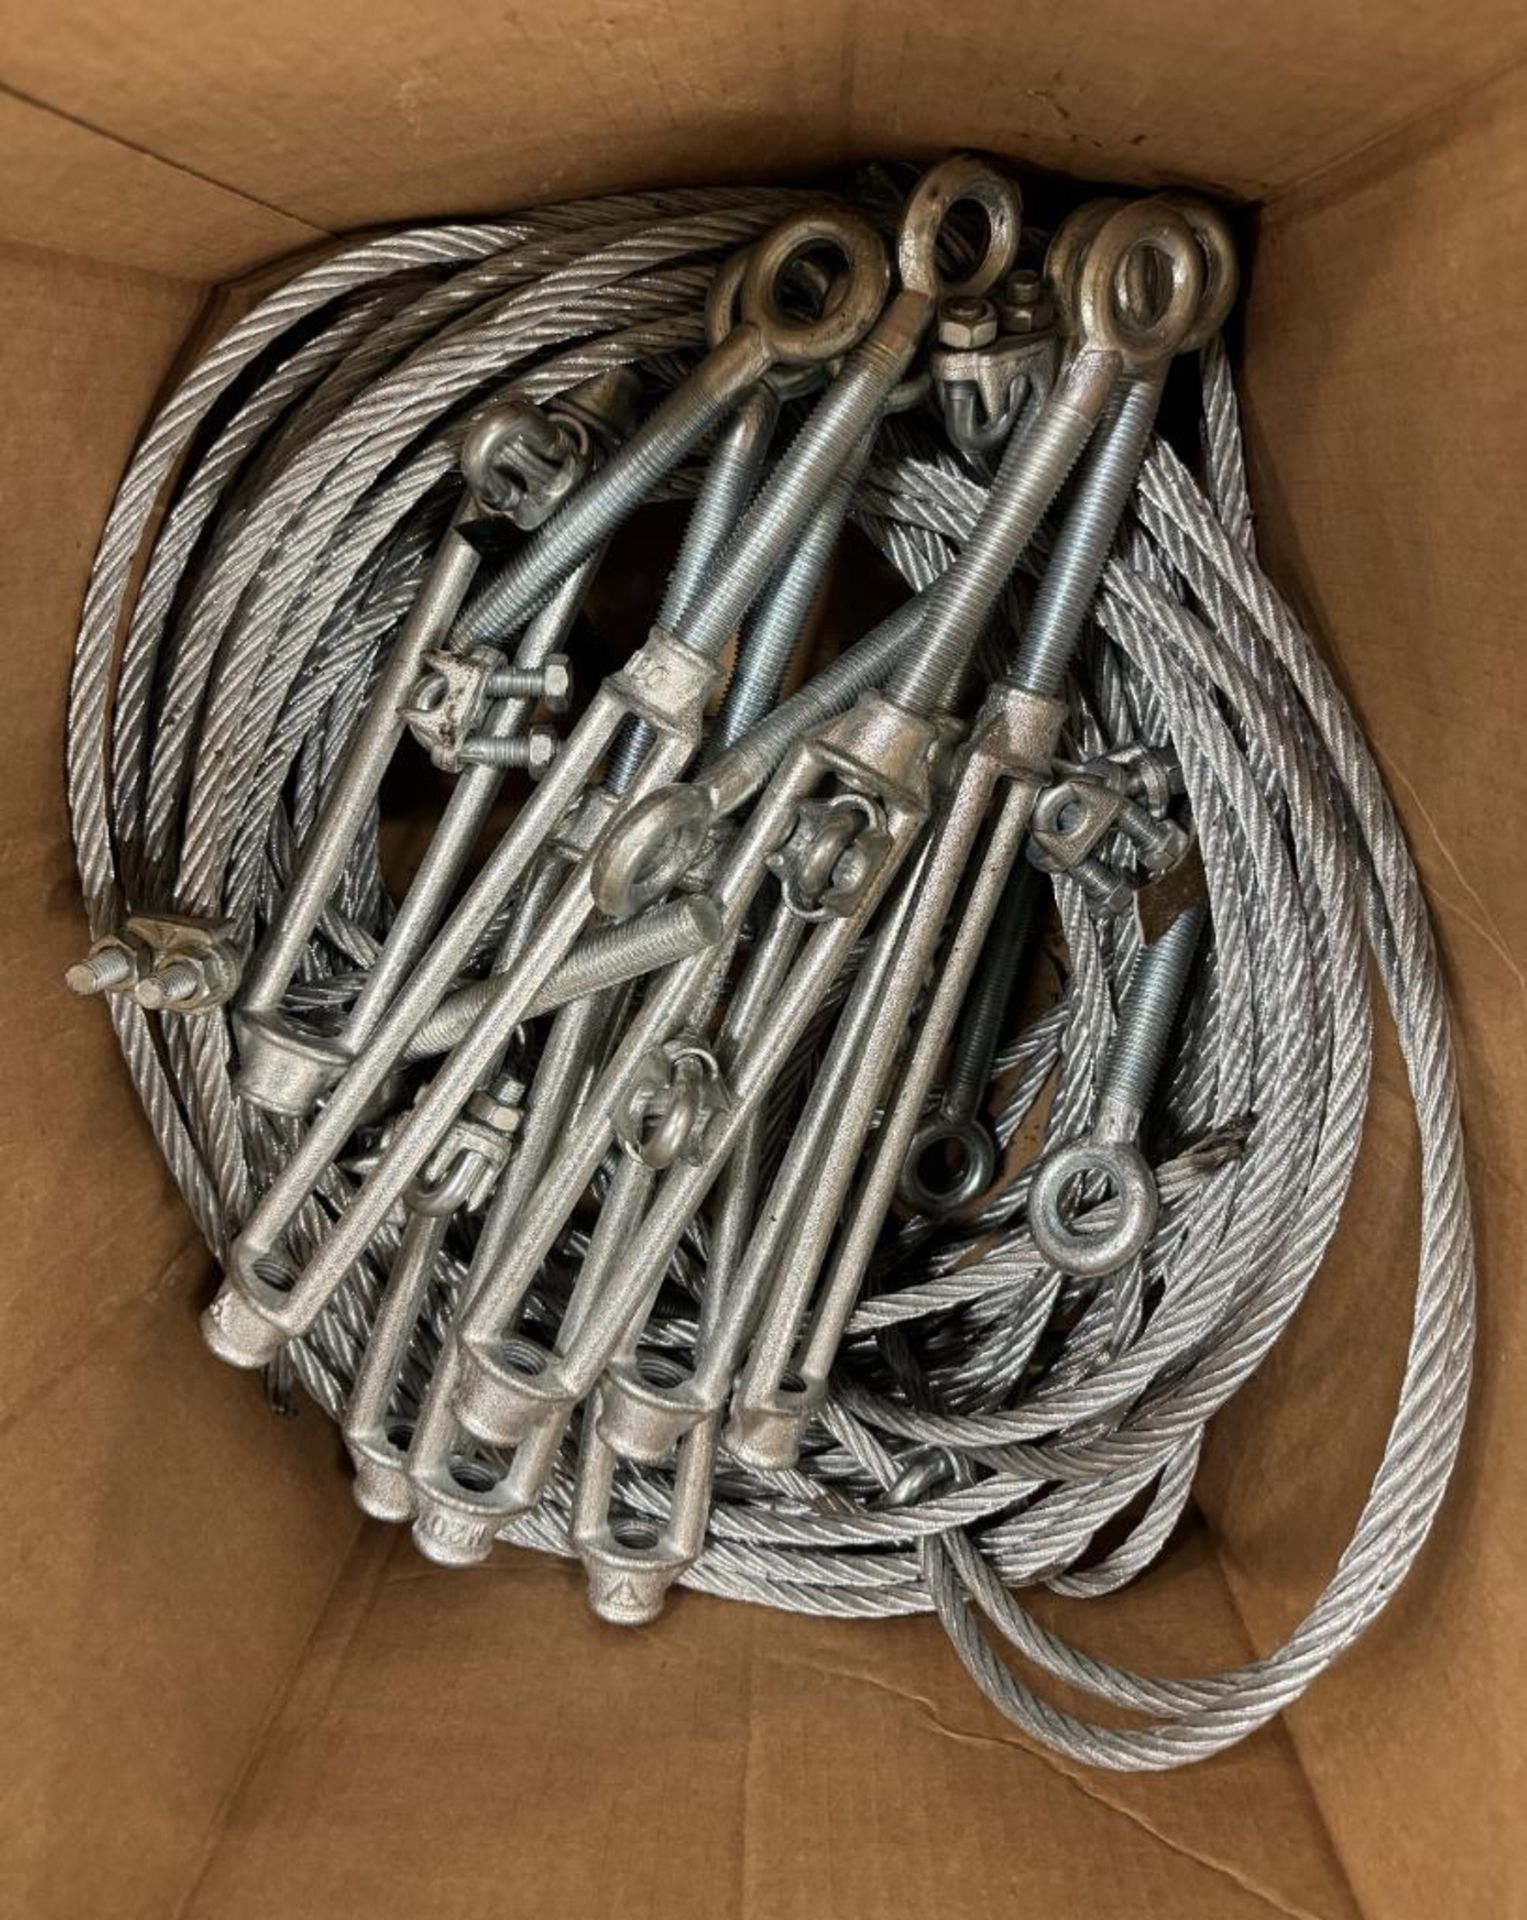 Lot Consisting Of: (1) Cart, (1) Box Of Turnbuckles & Wire Cable. - Image 4 of 4